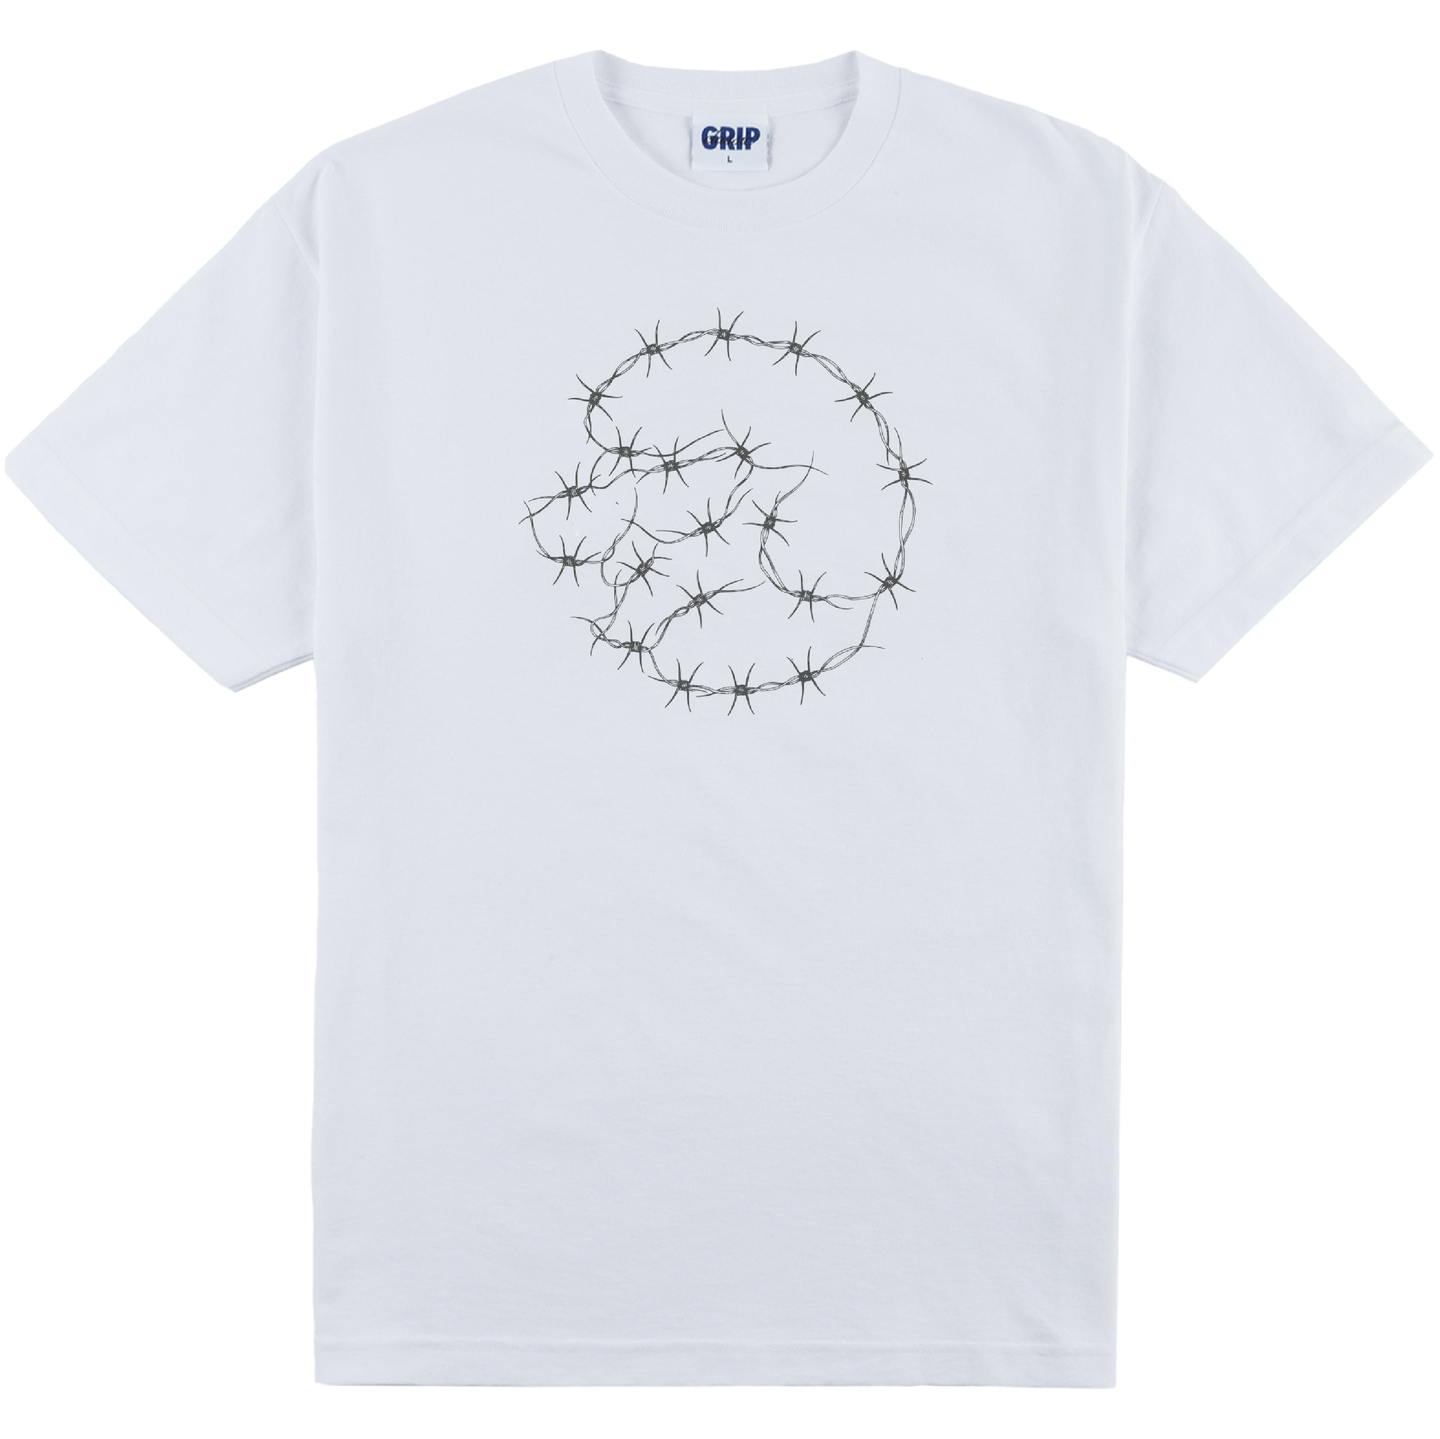 Wired tee White